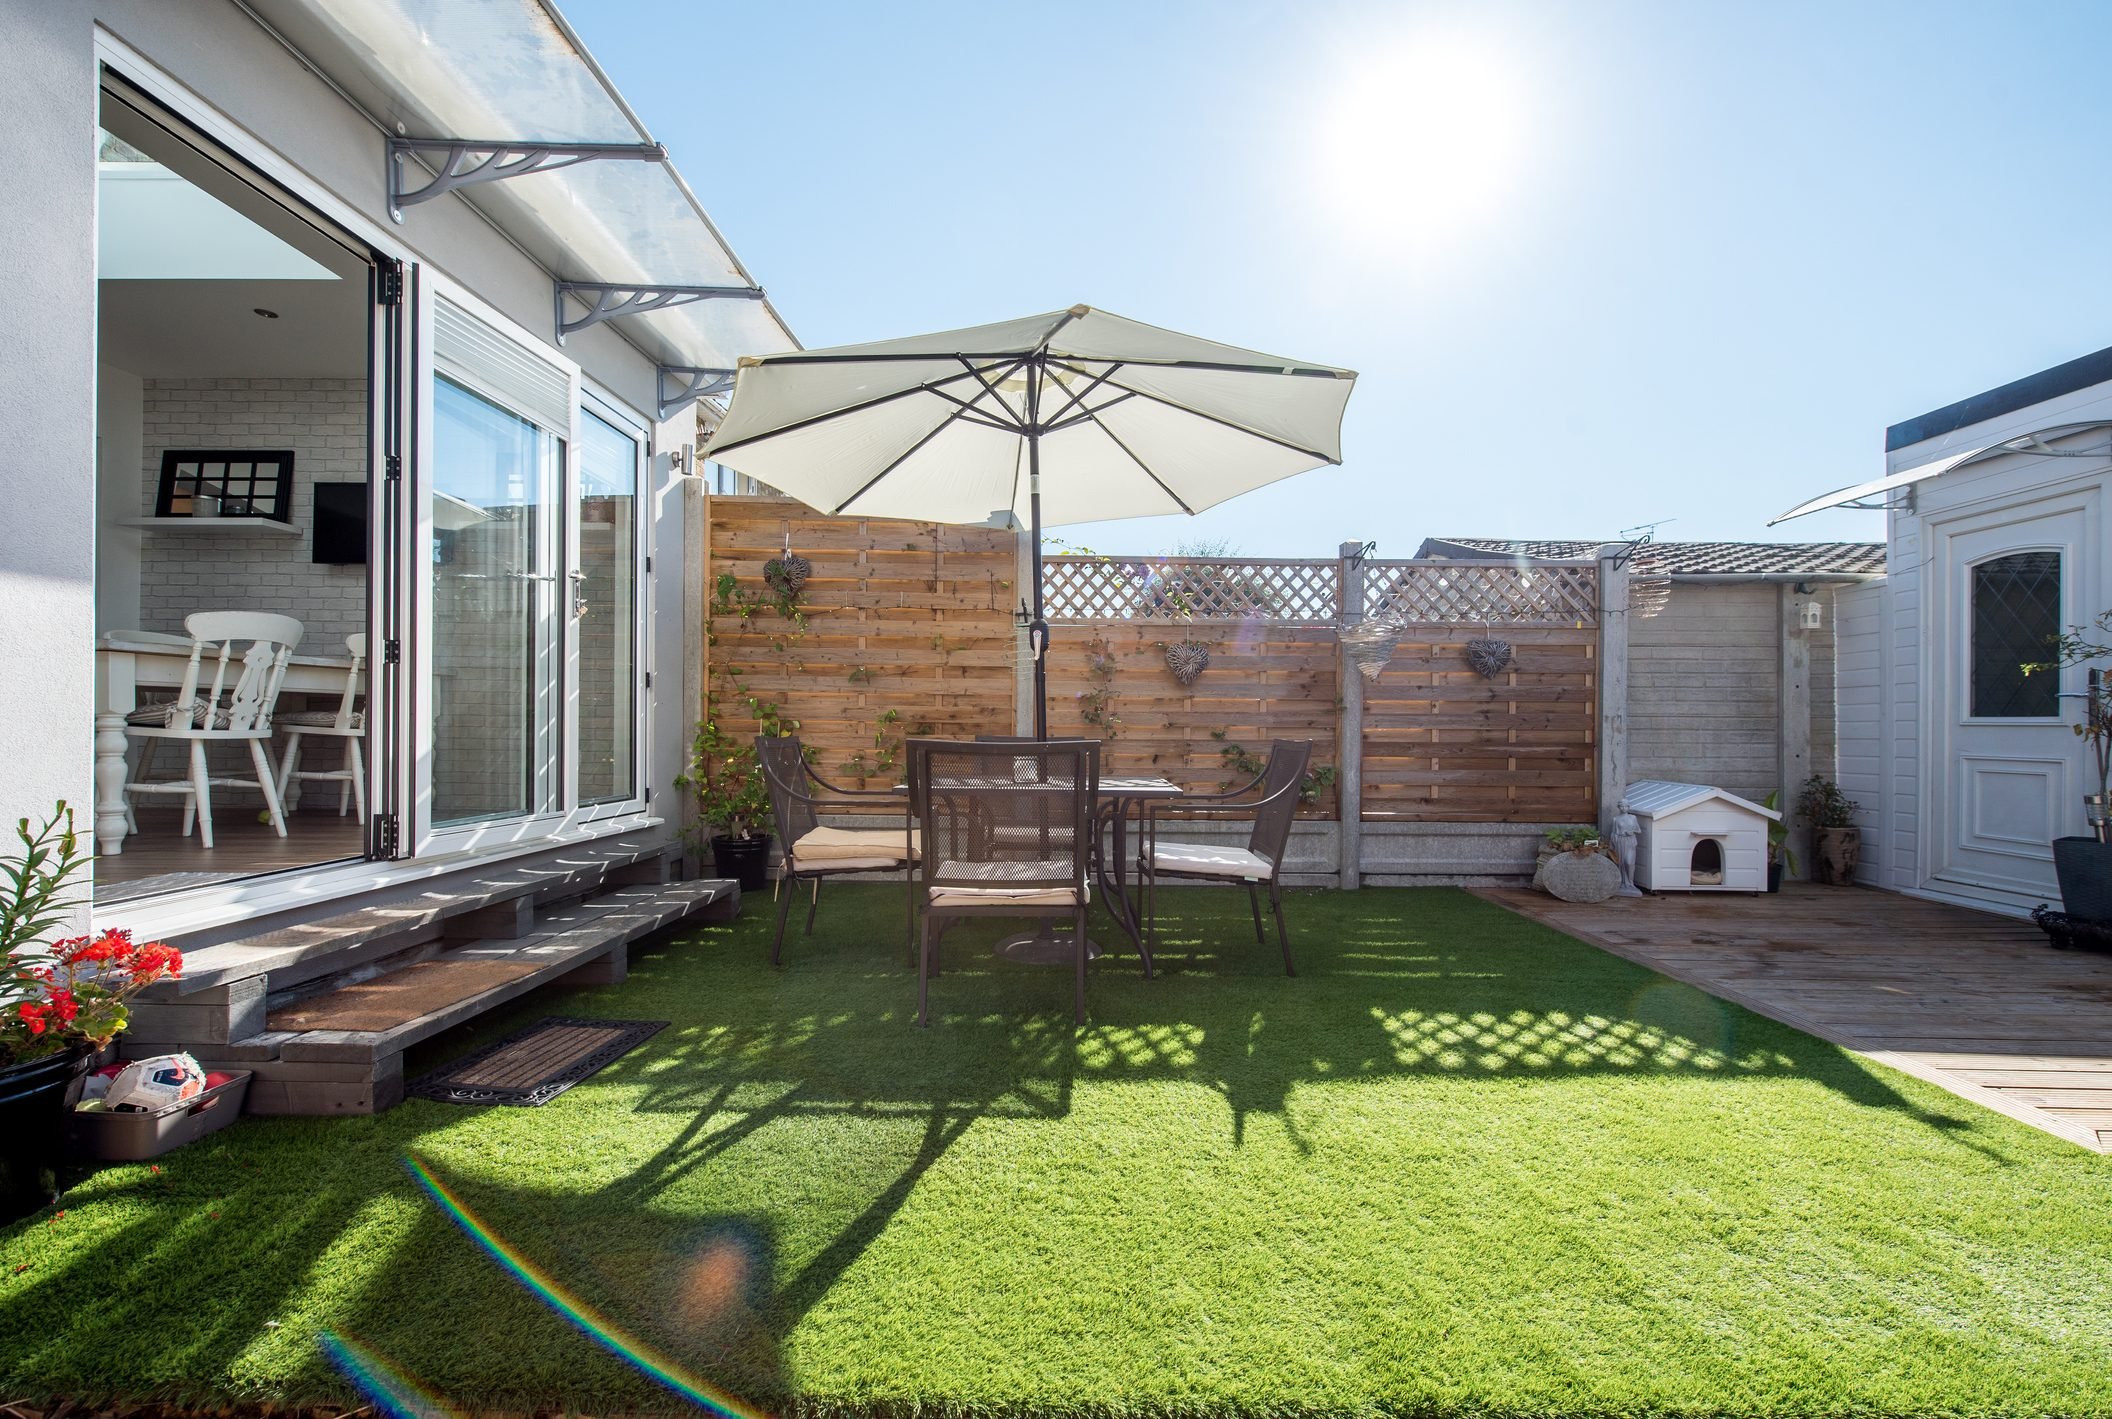 How To Choose the Right Artificial Grass for Your Yard